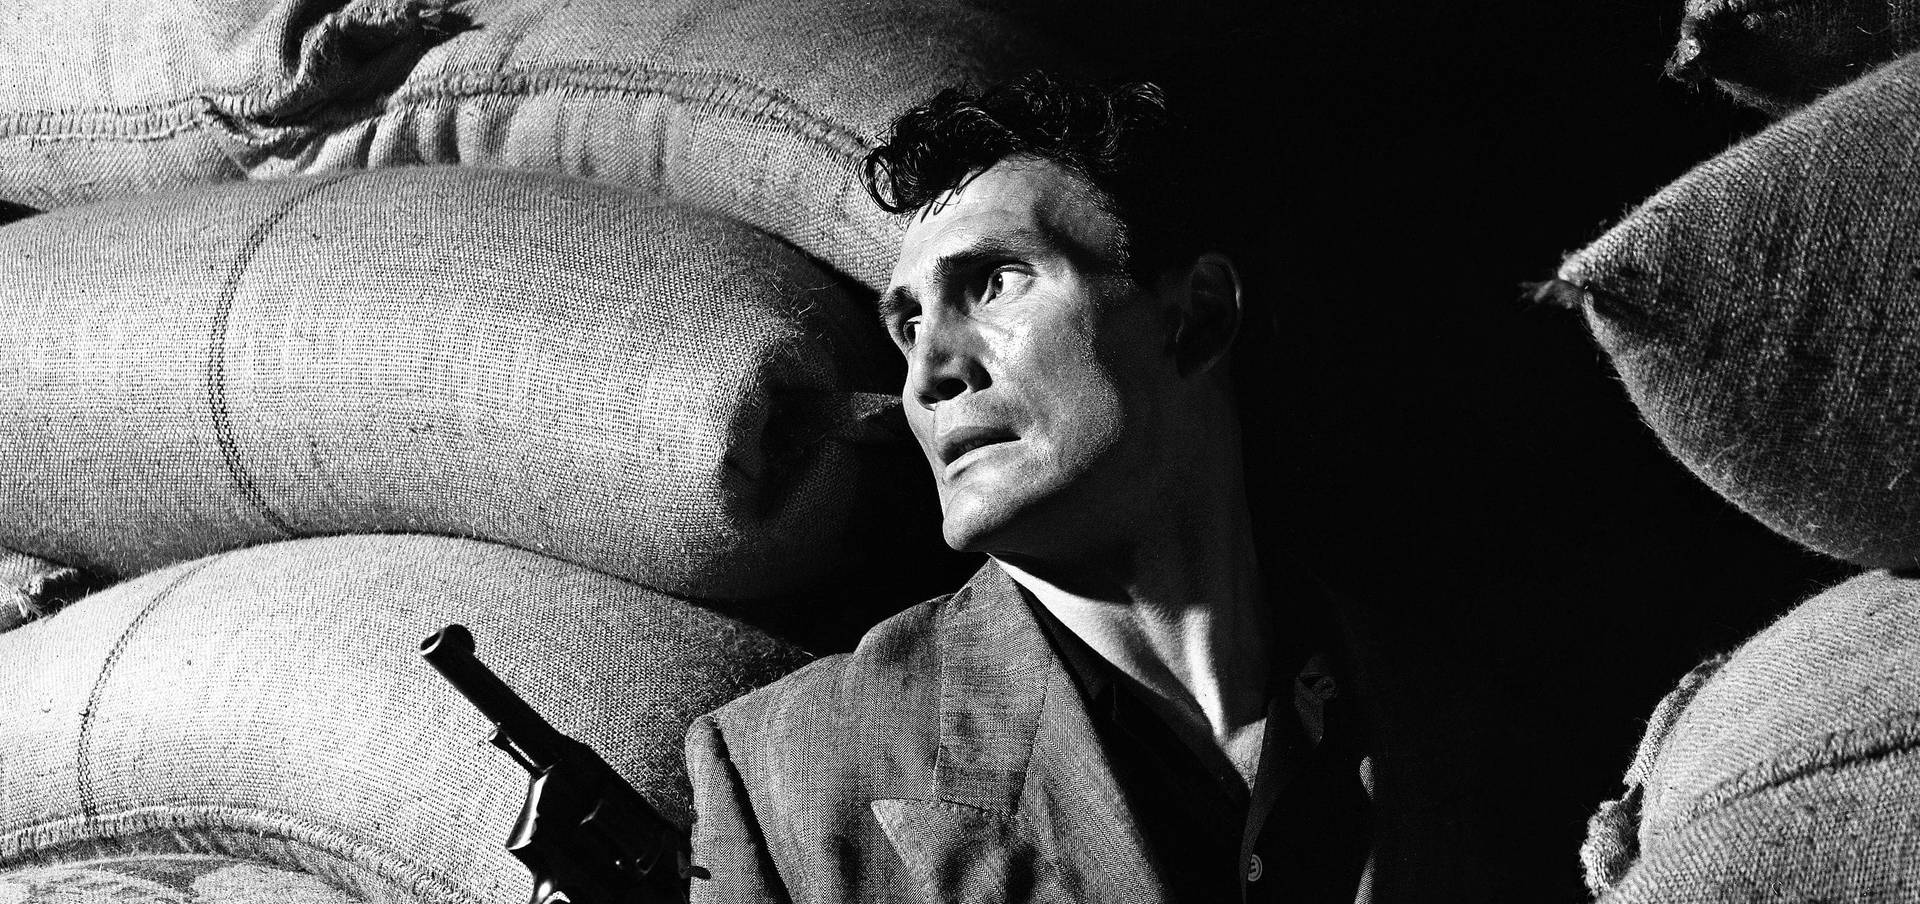 Jack Palance in the film 'Panic in the Streets' Wallpaper